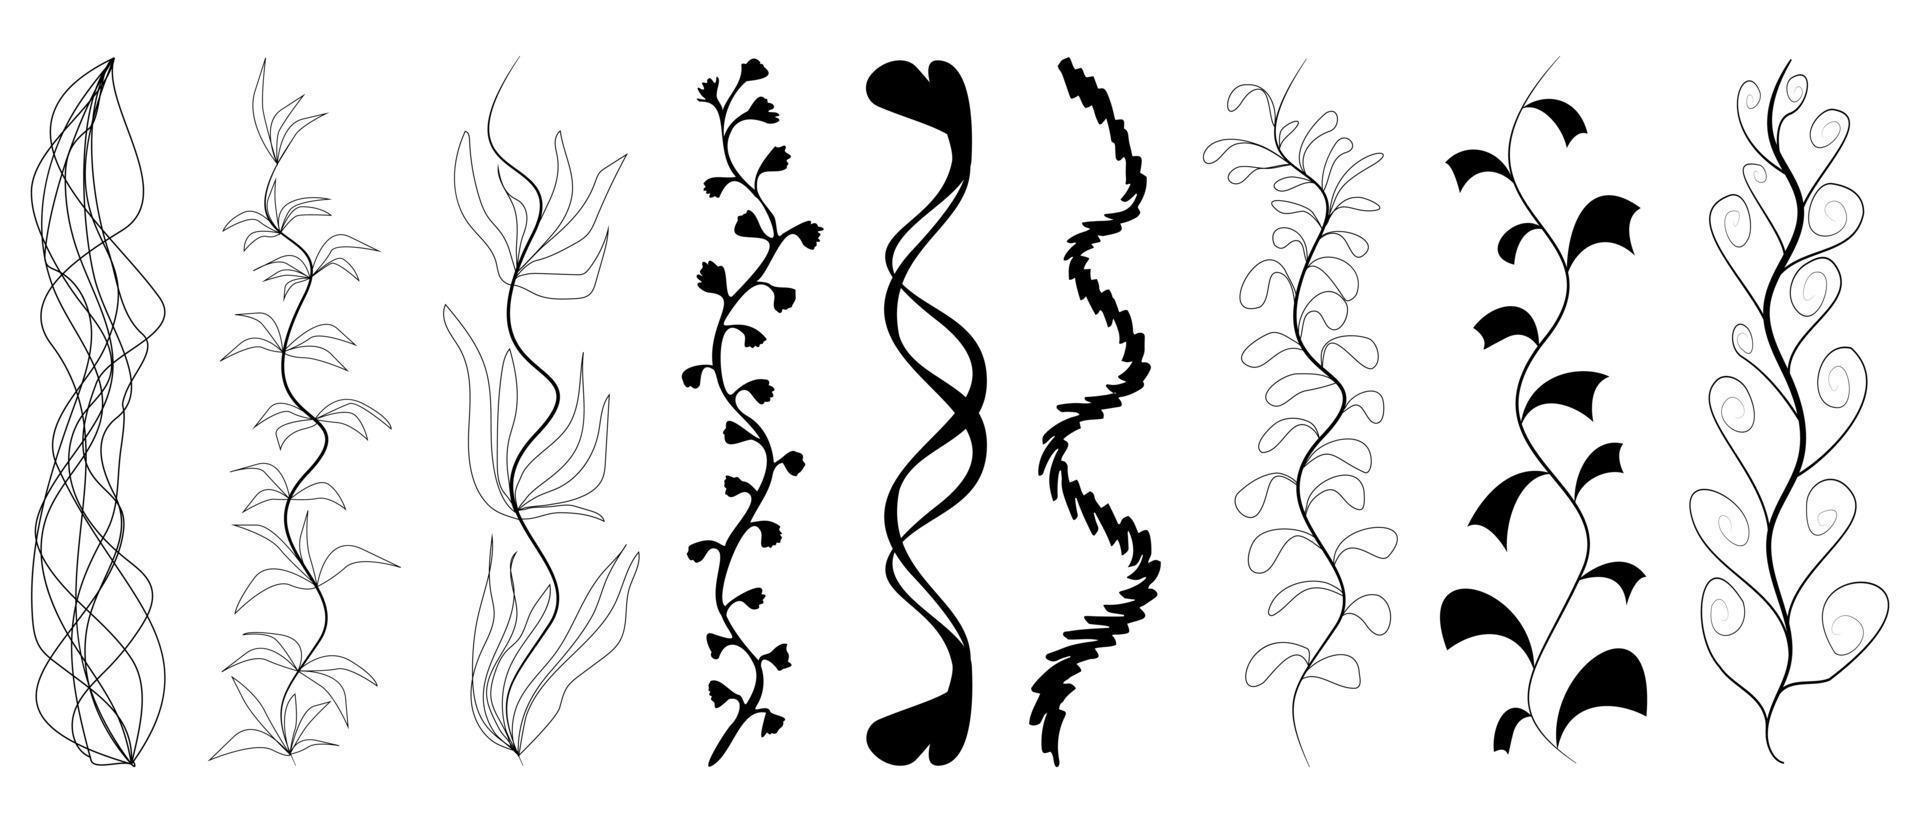 Ribbon pattern for the border. Floral motif border to decorate the edge of the leaf vector